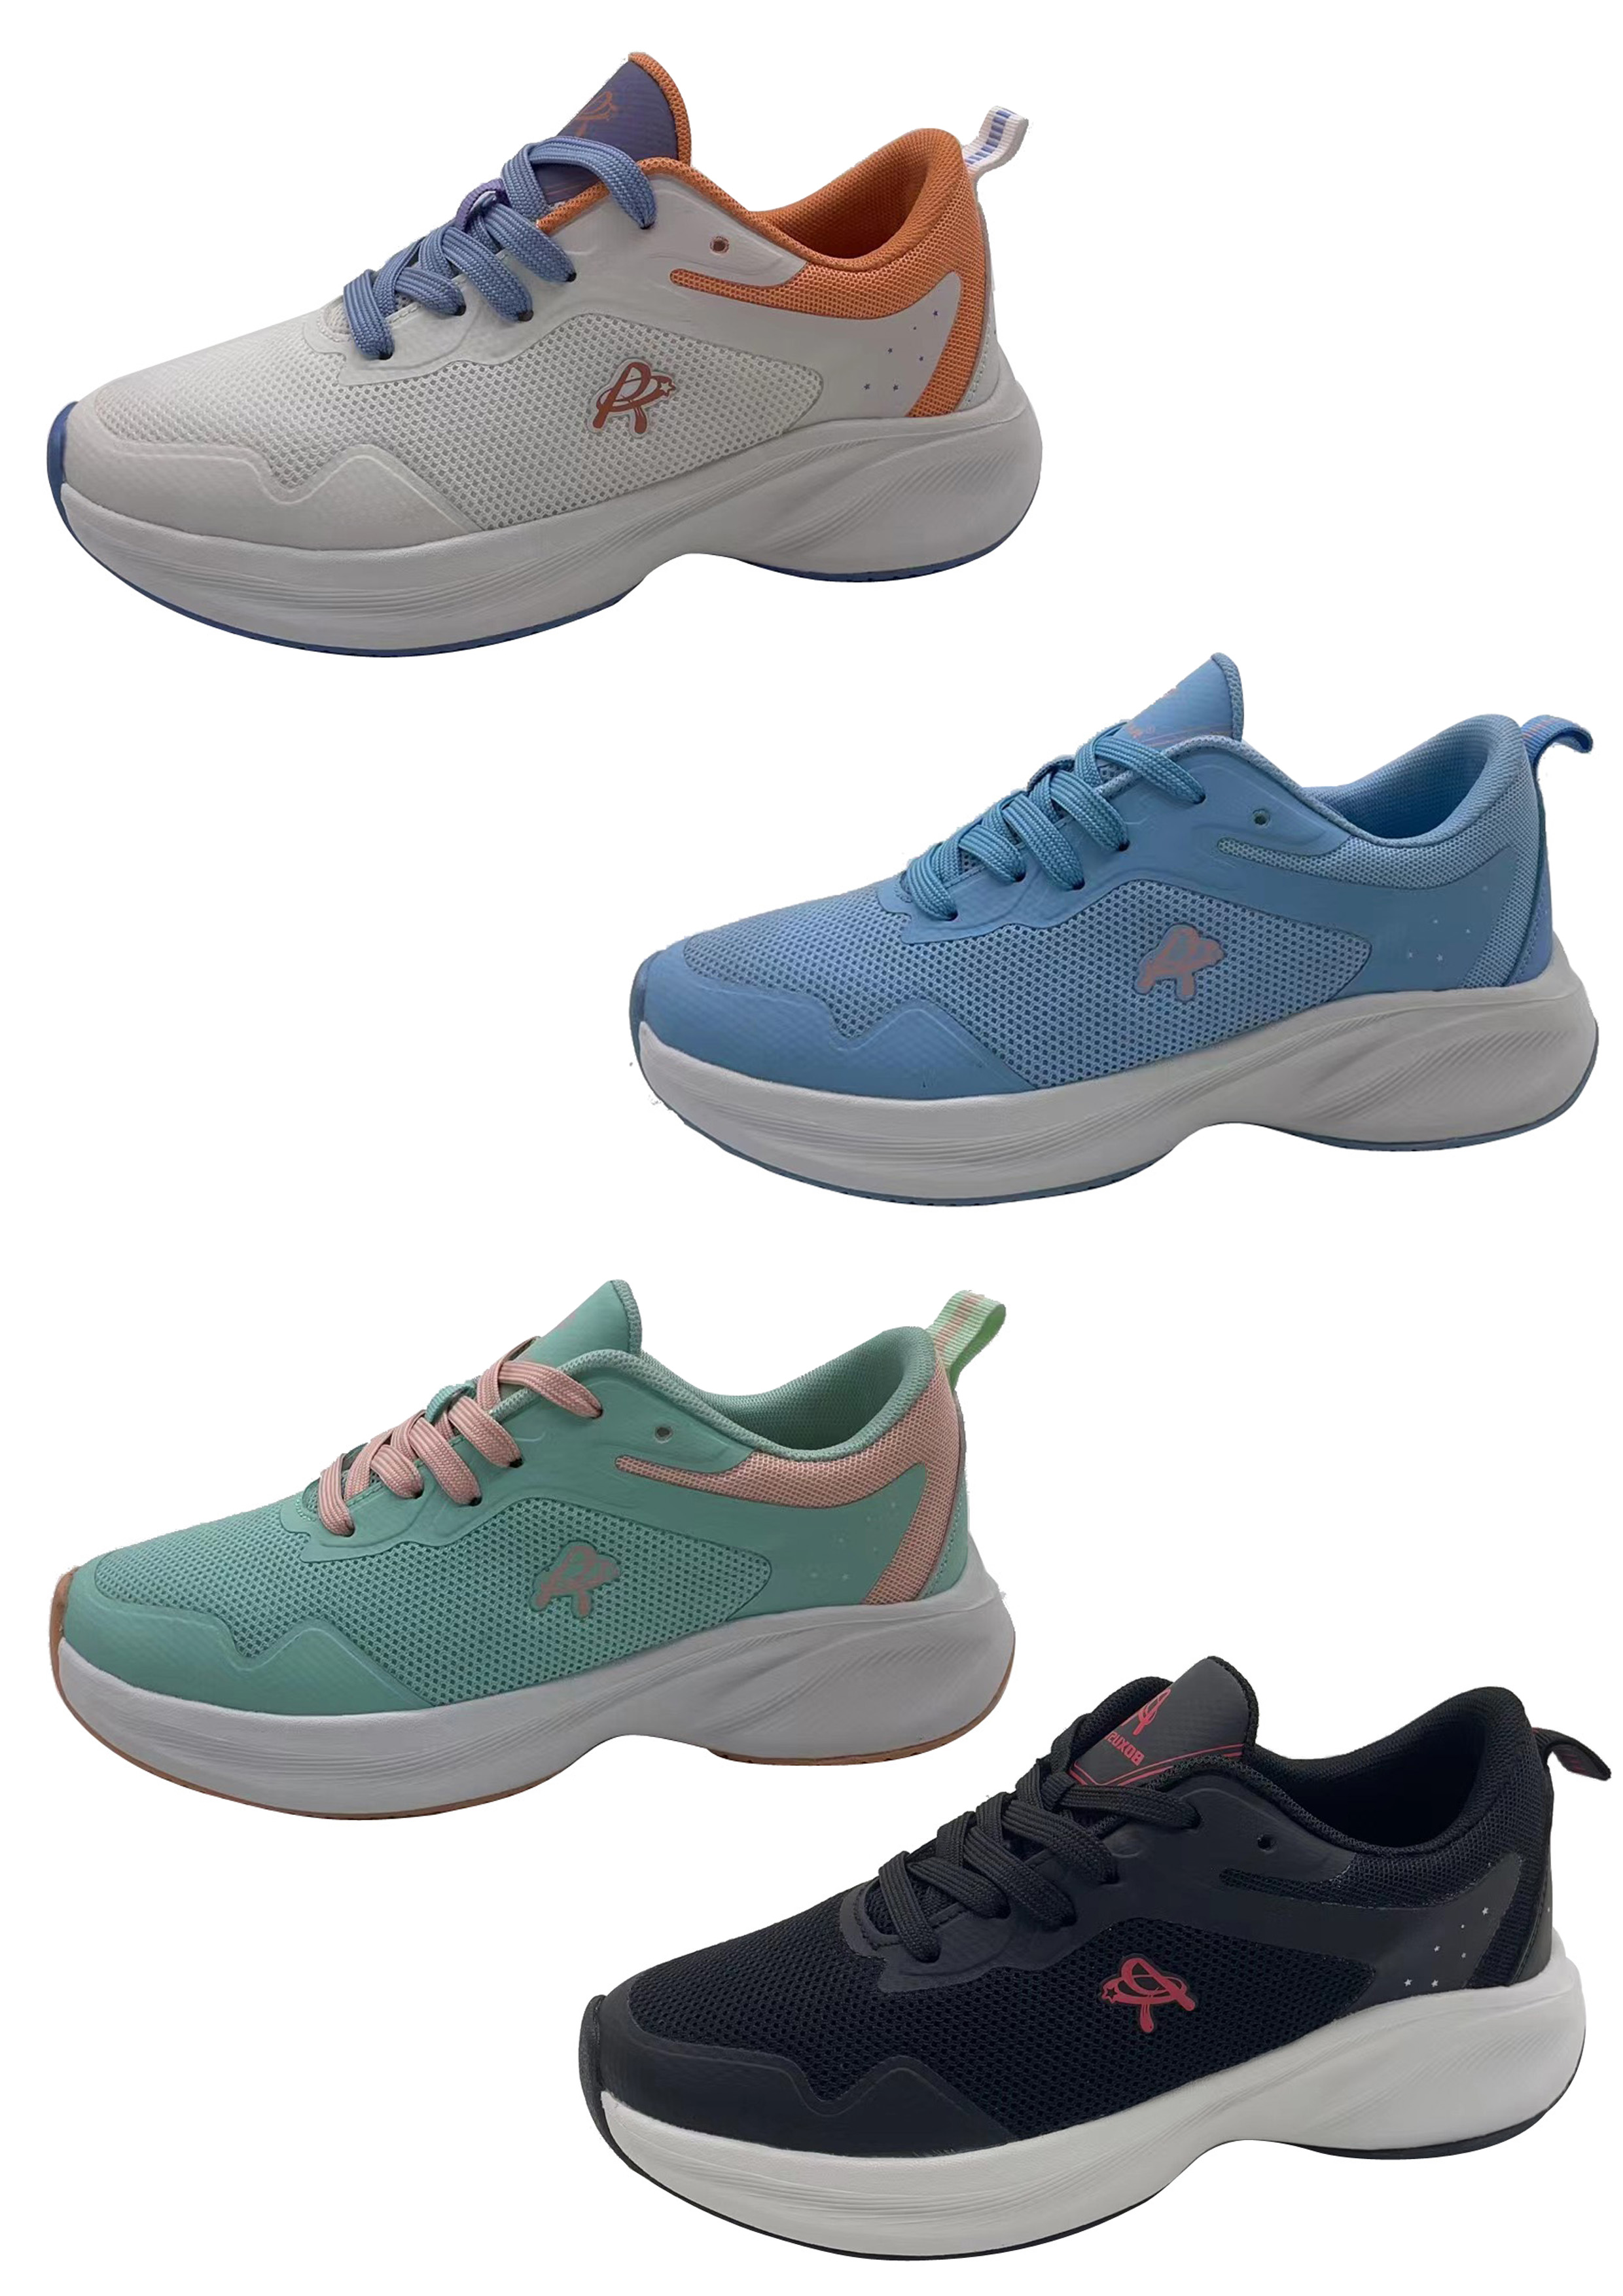 Spring Summer 2023 women's running shoes, customize color workable Manufacturers, Spring Summer 2023 women's running shoes, customize color workable Factory, Supply Spring Summer 2023 women's running shoes, customize color workable